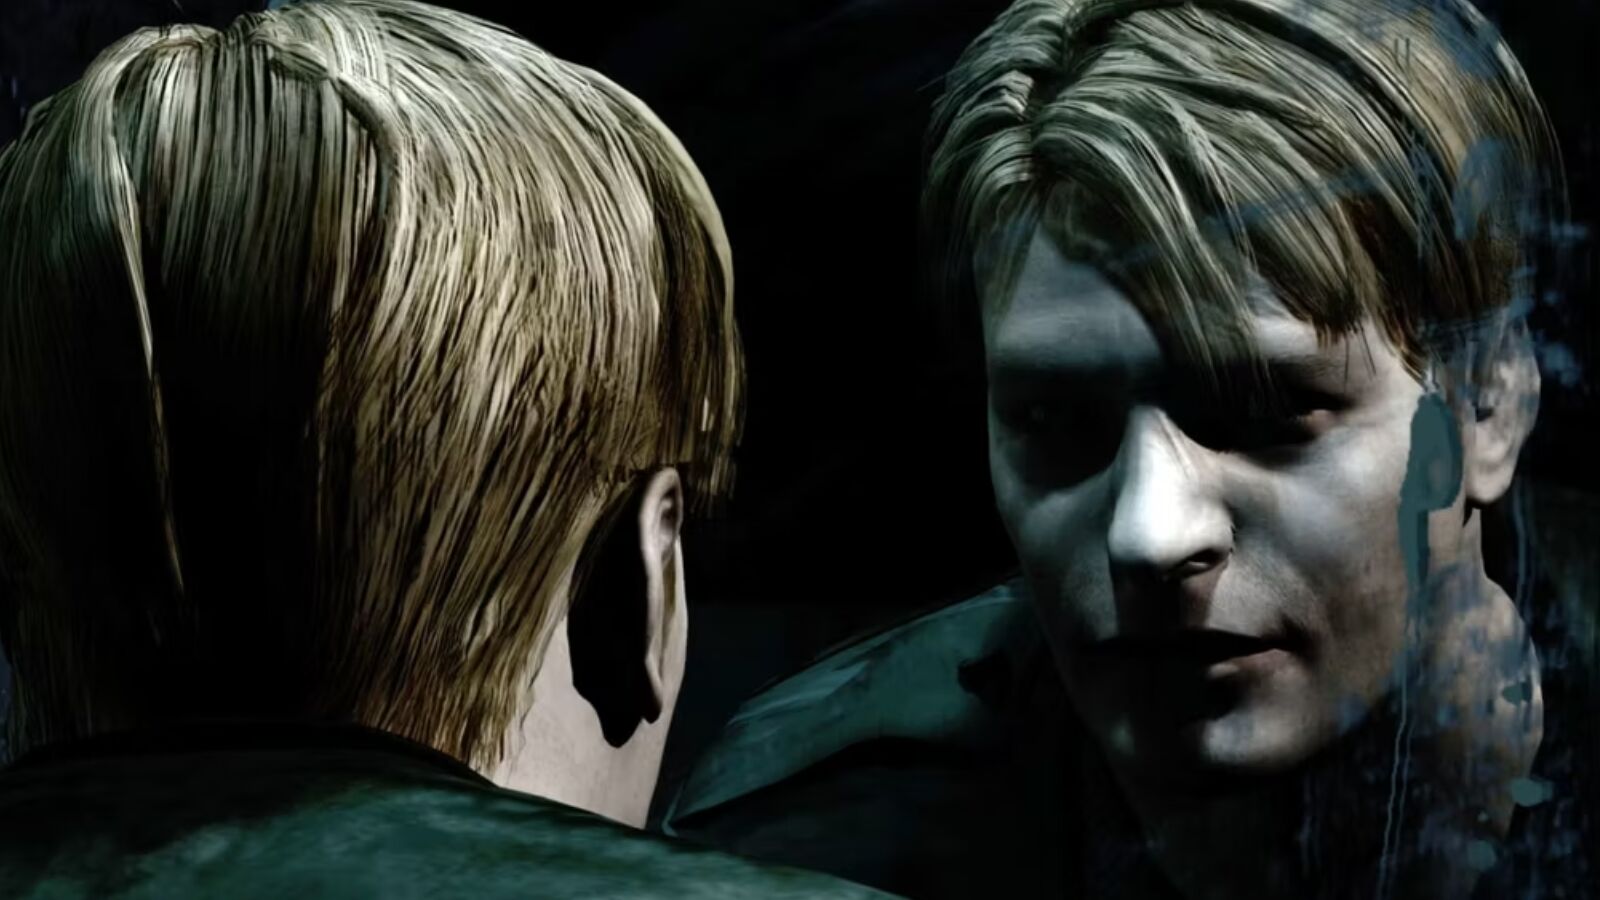 Silent Hill 2 remake will be "faithful to the original title", claims Bloober Team